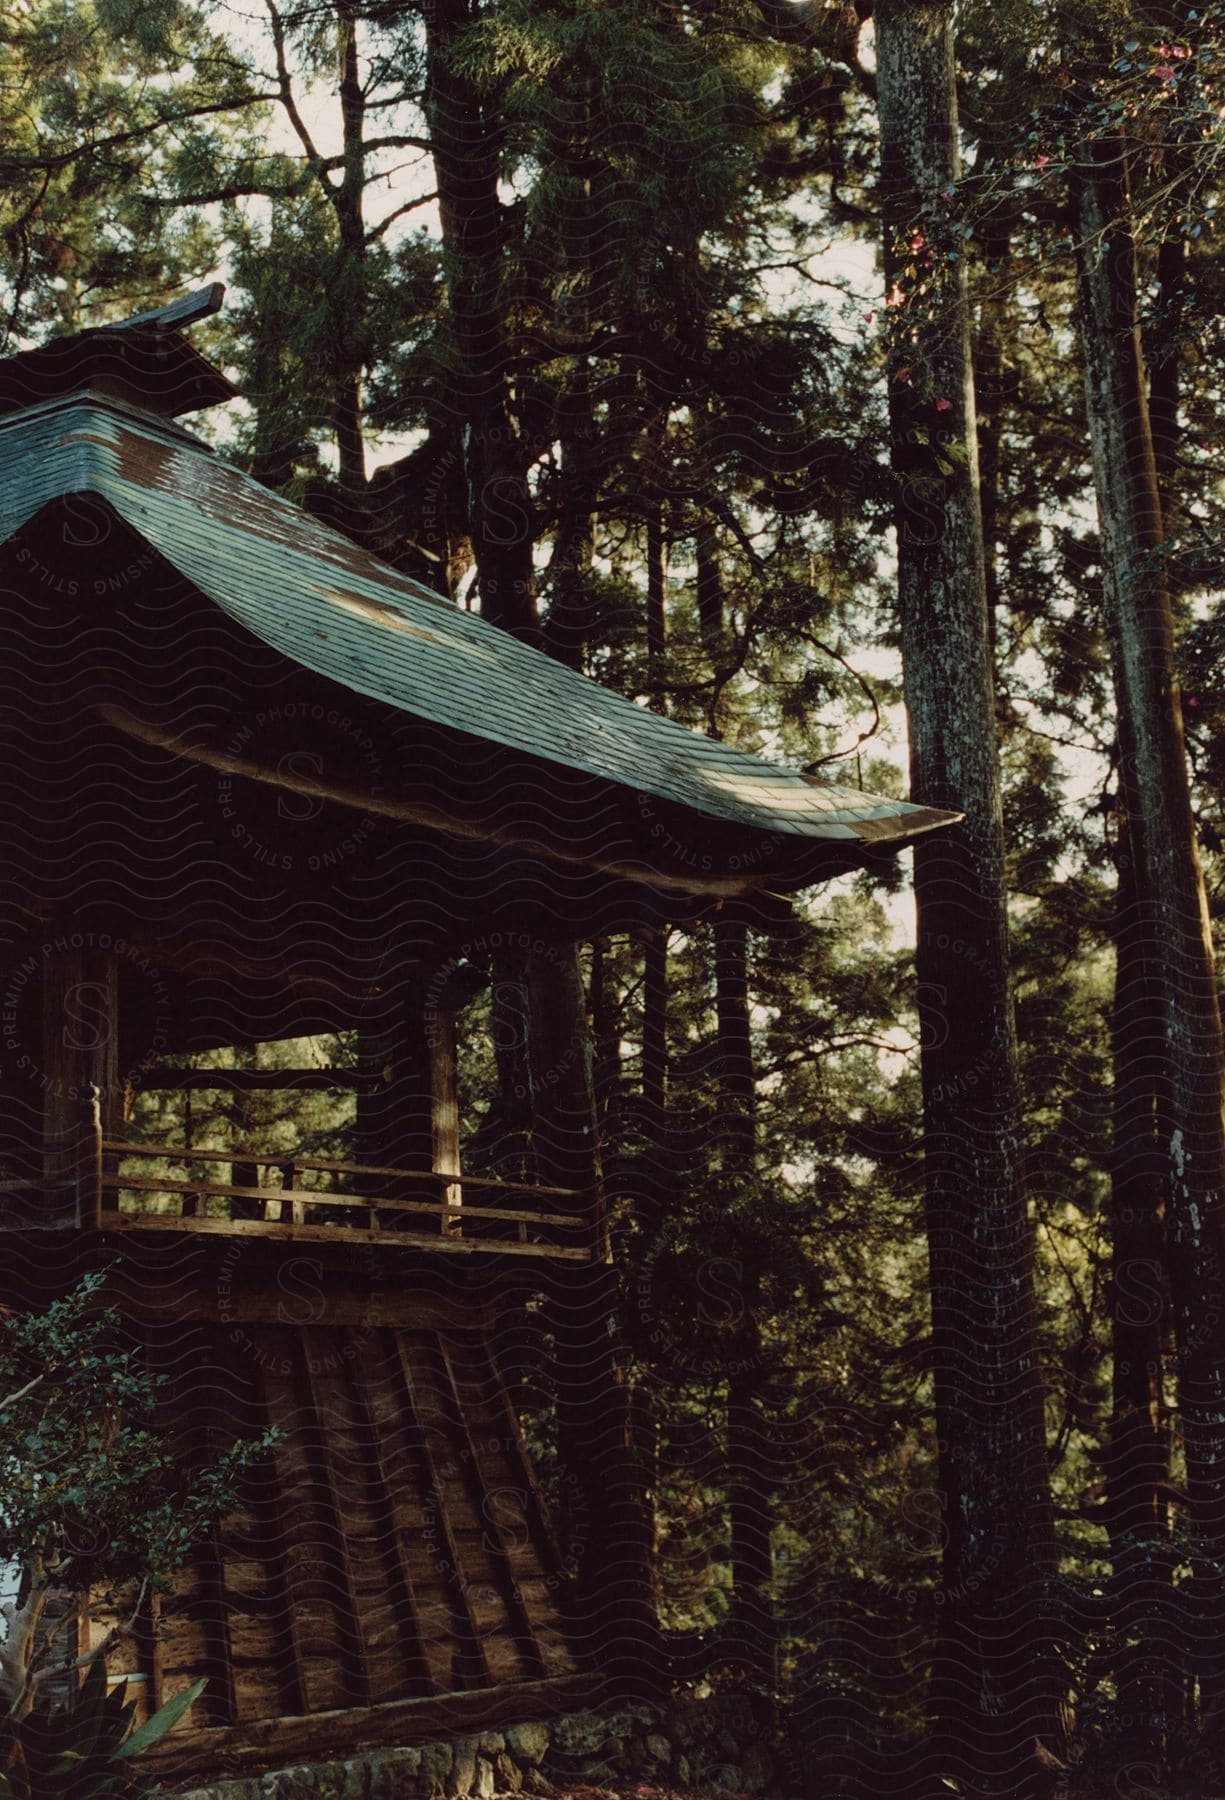 An Asian style wooden temple surrounded by tall trees in the forest